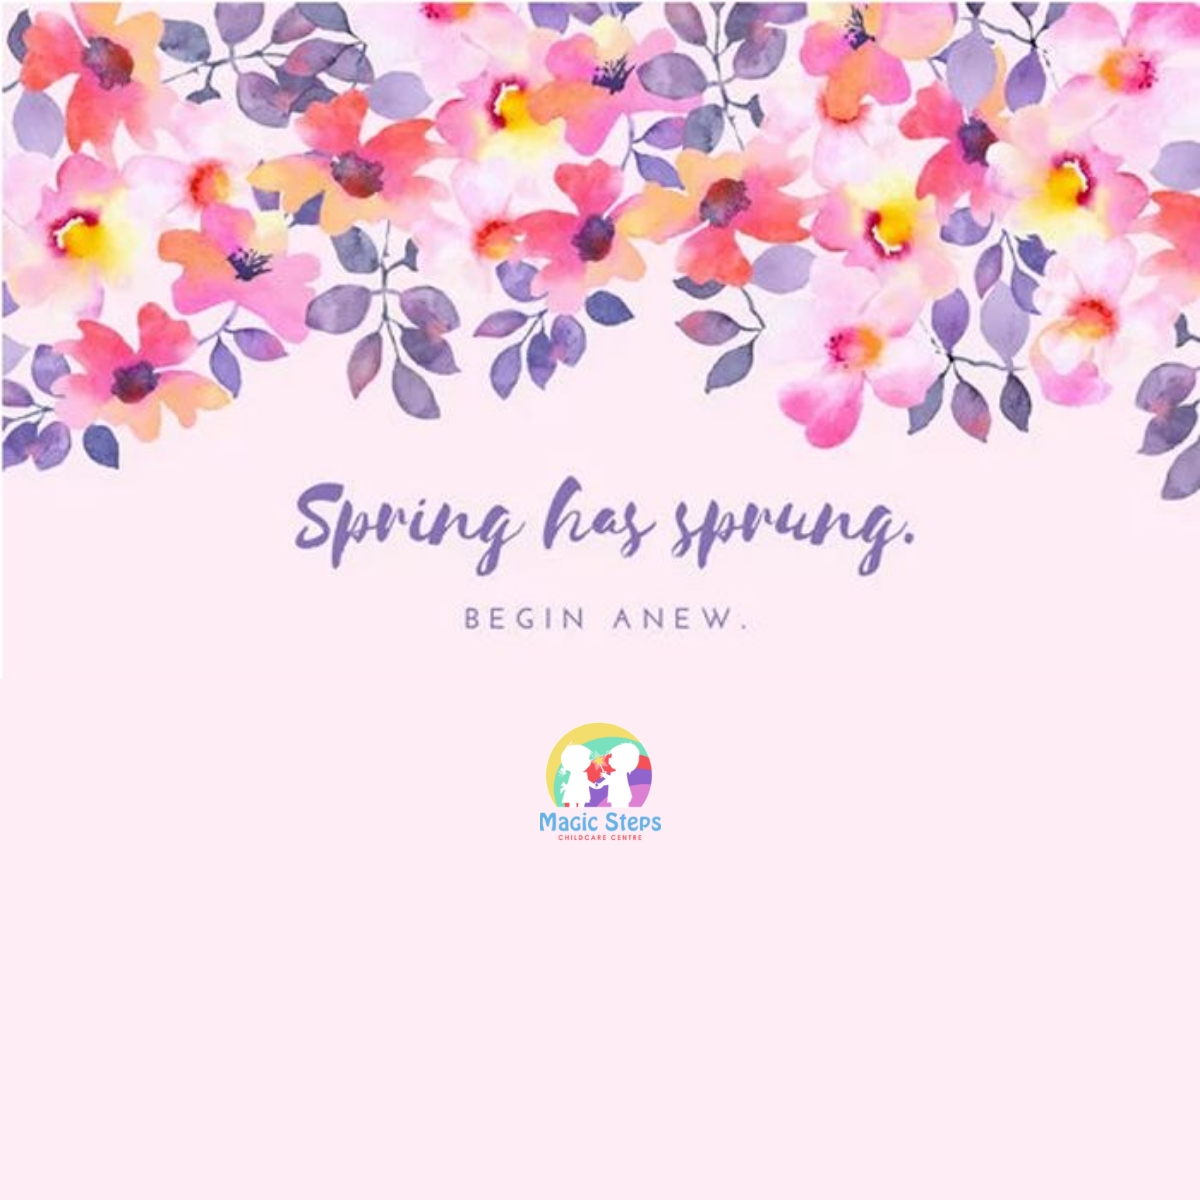 Spring Begins- Tuesday 28th March